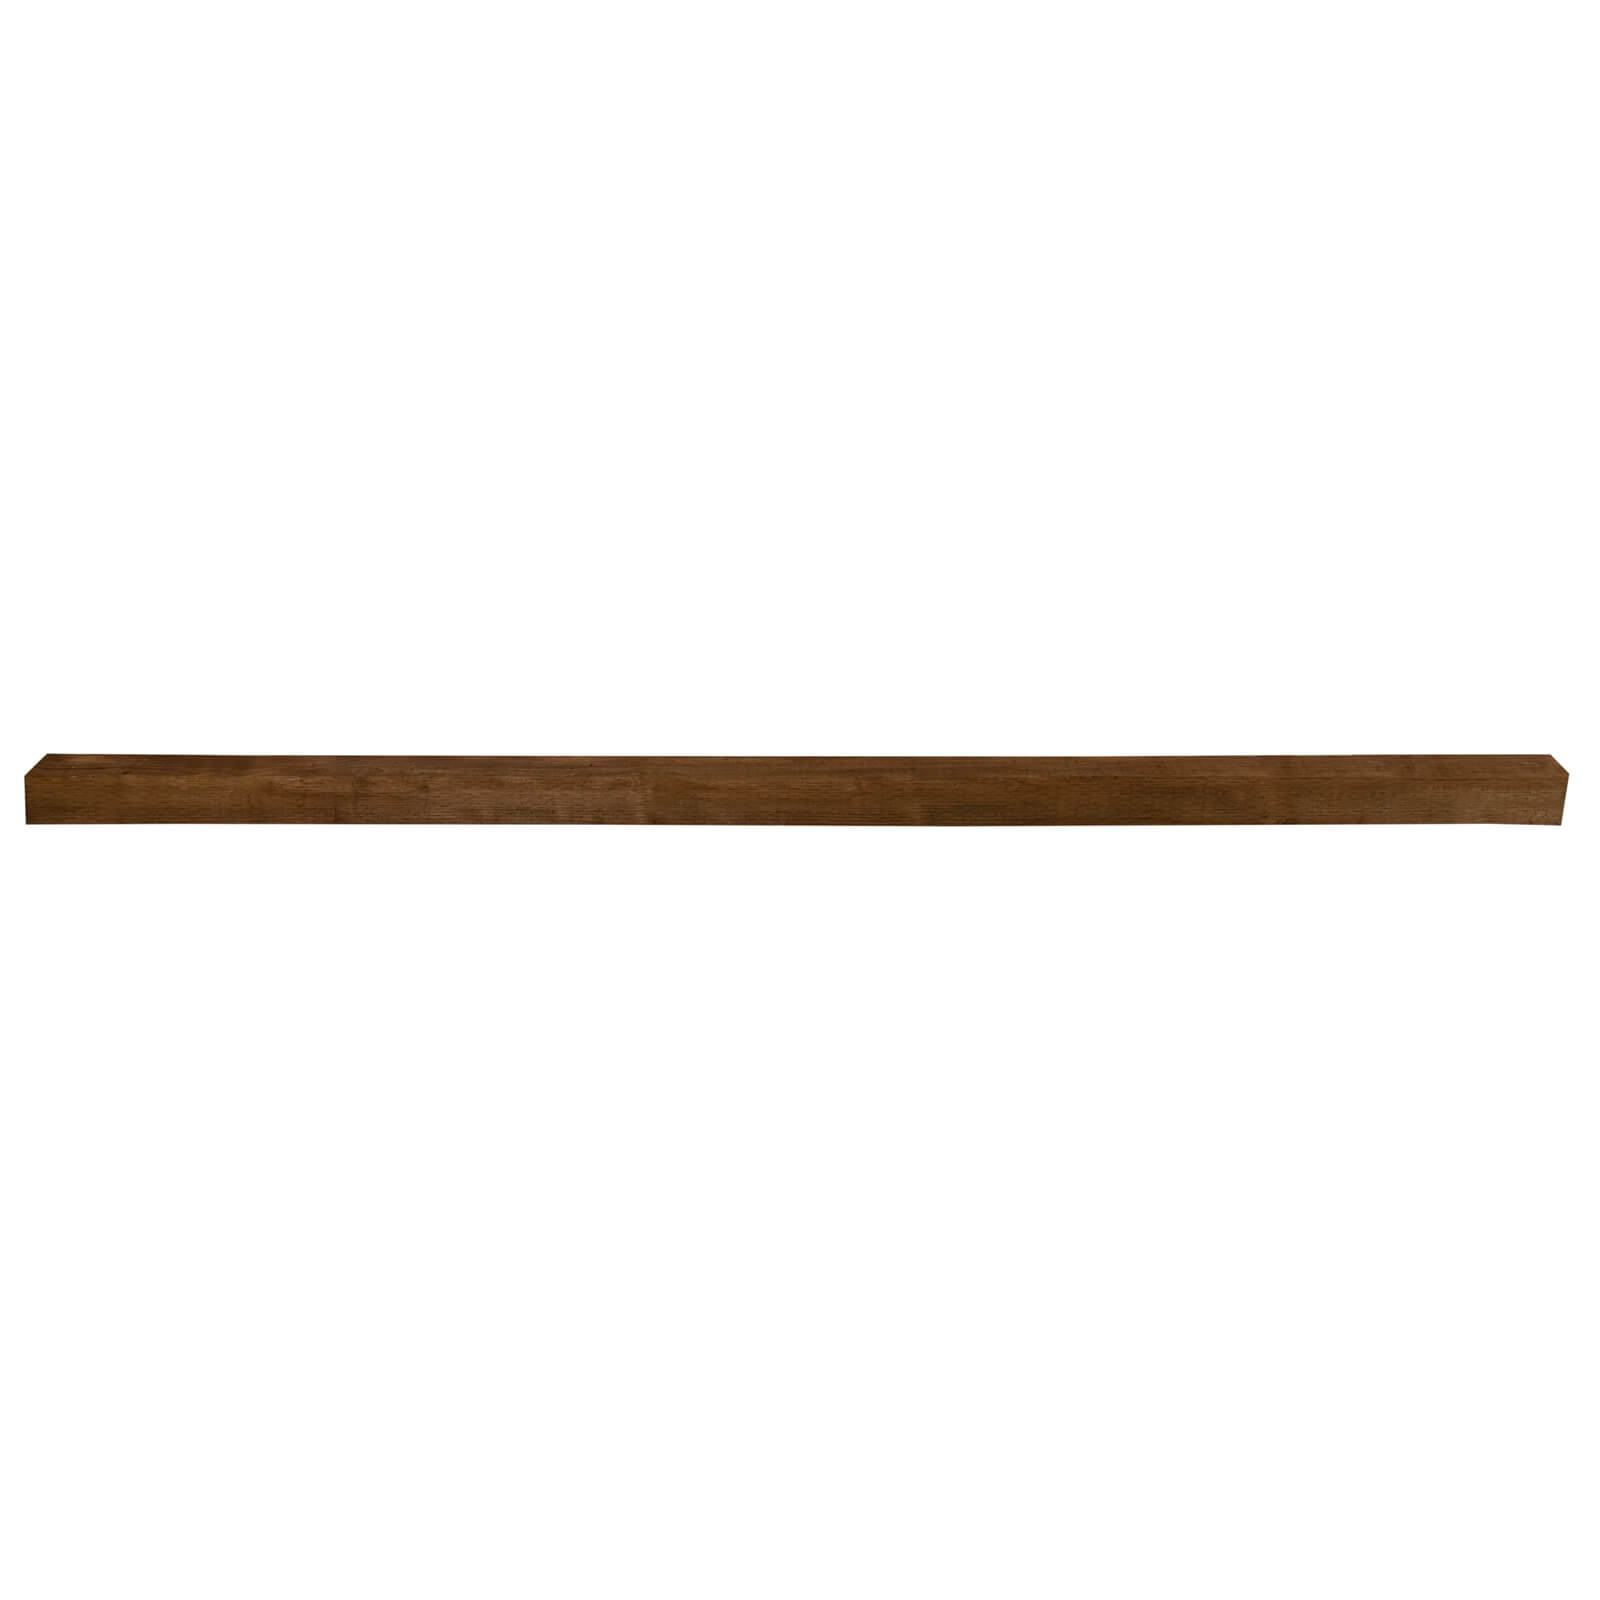 Brown Incised Fence Post 2.4m (2400 x 75 x 75mm) - Pack of 6